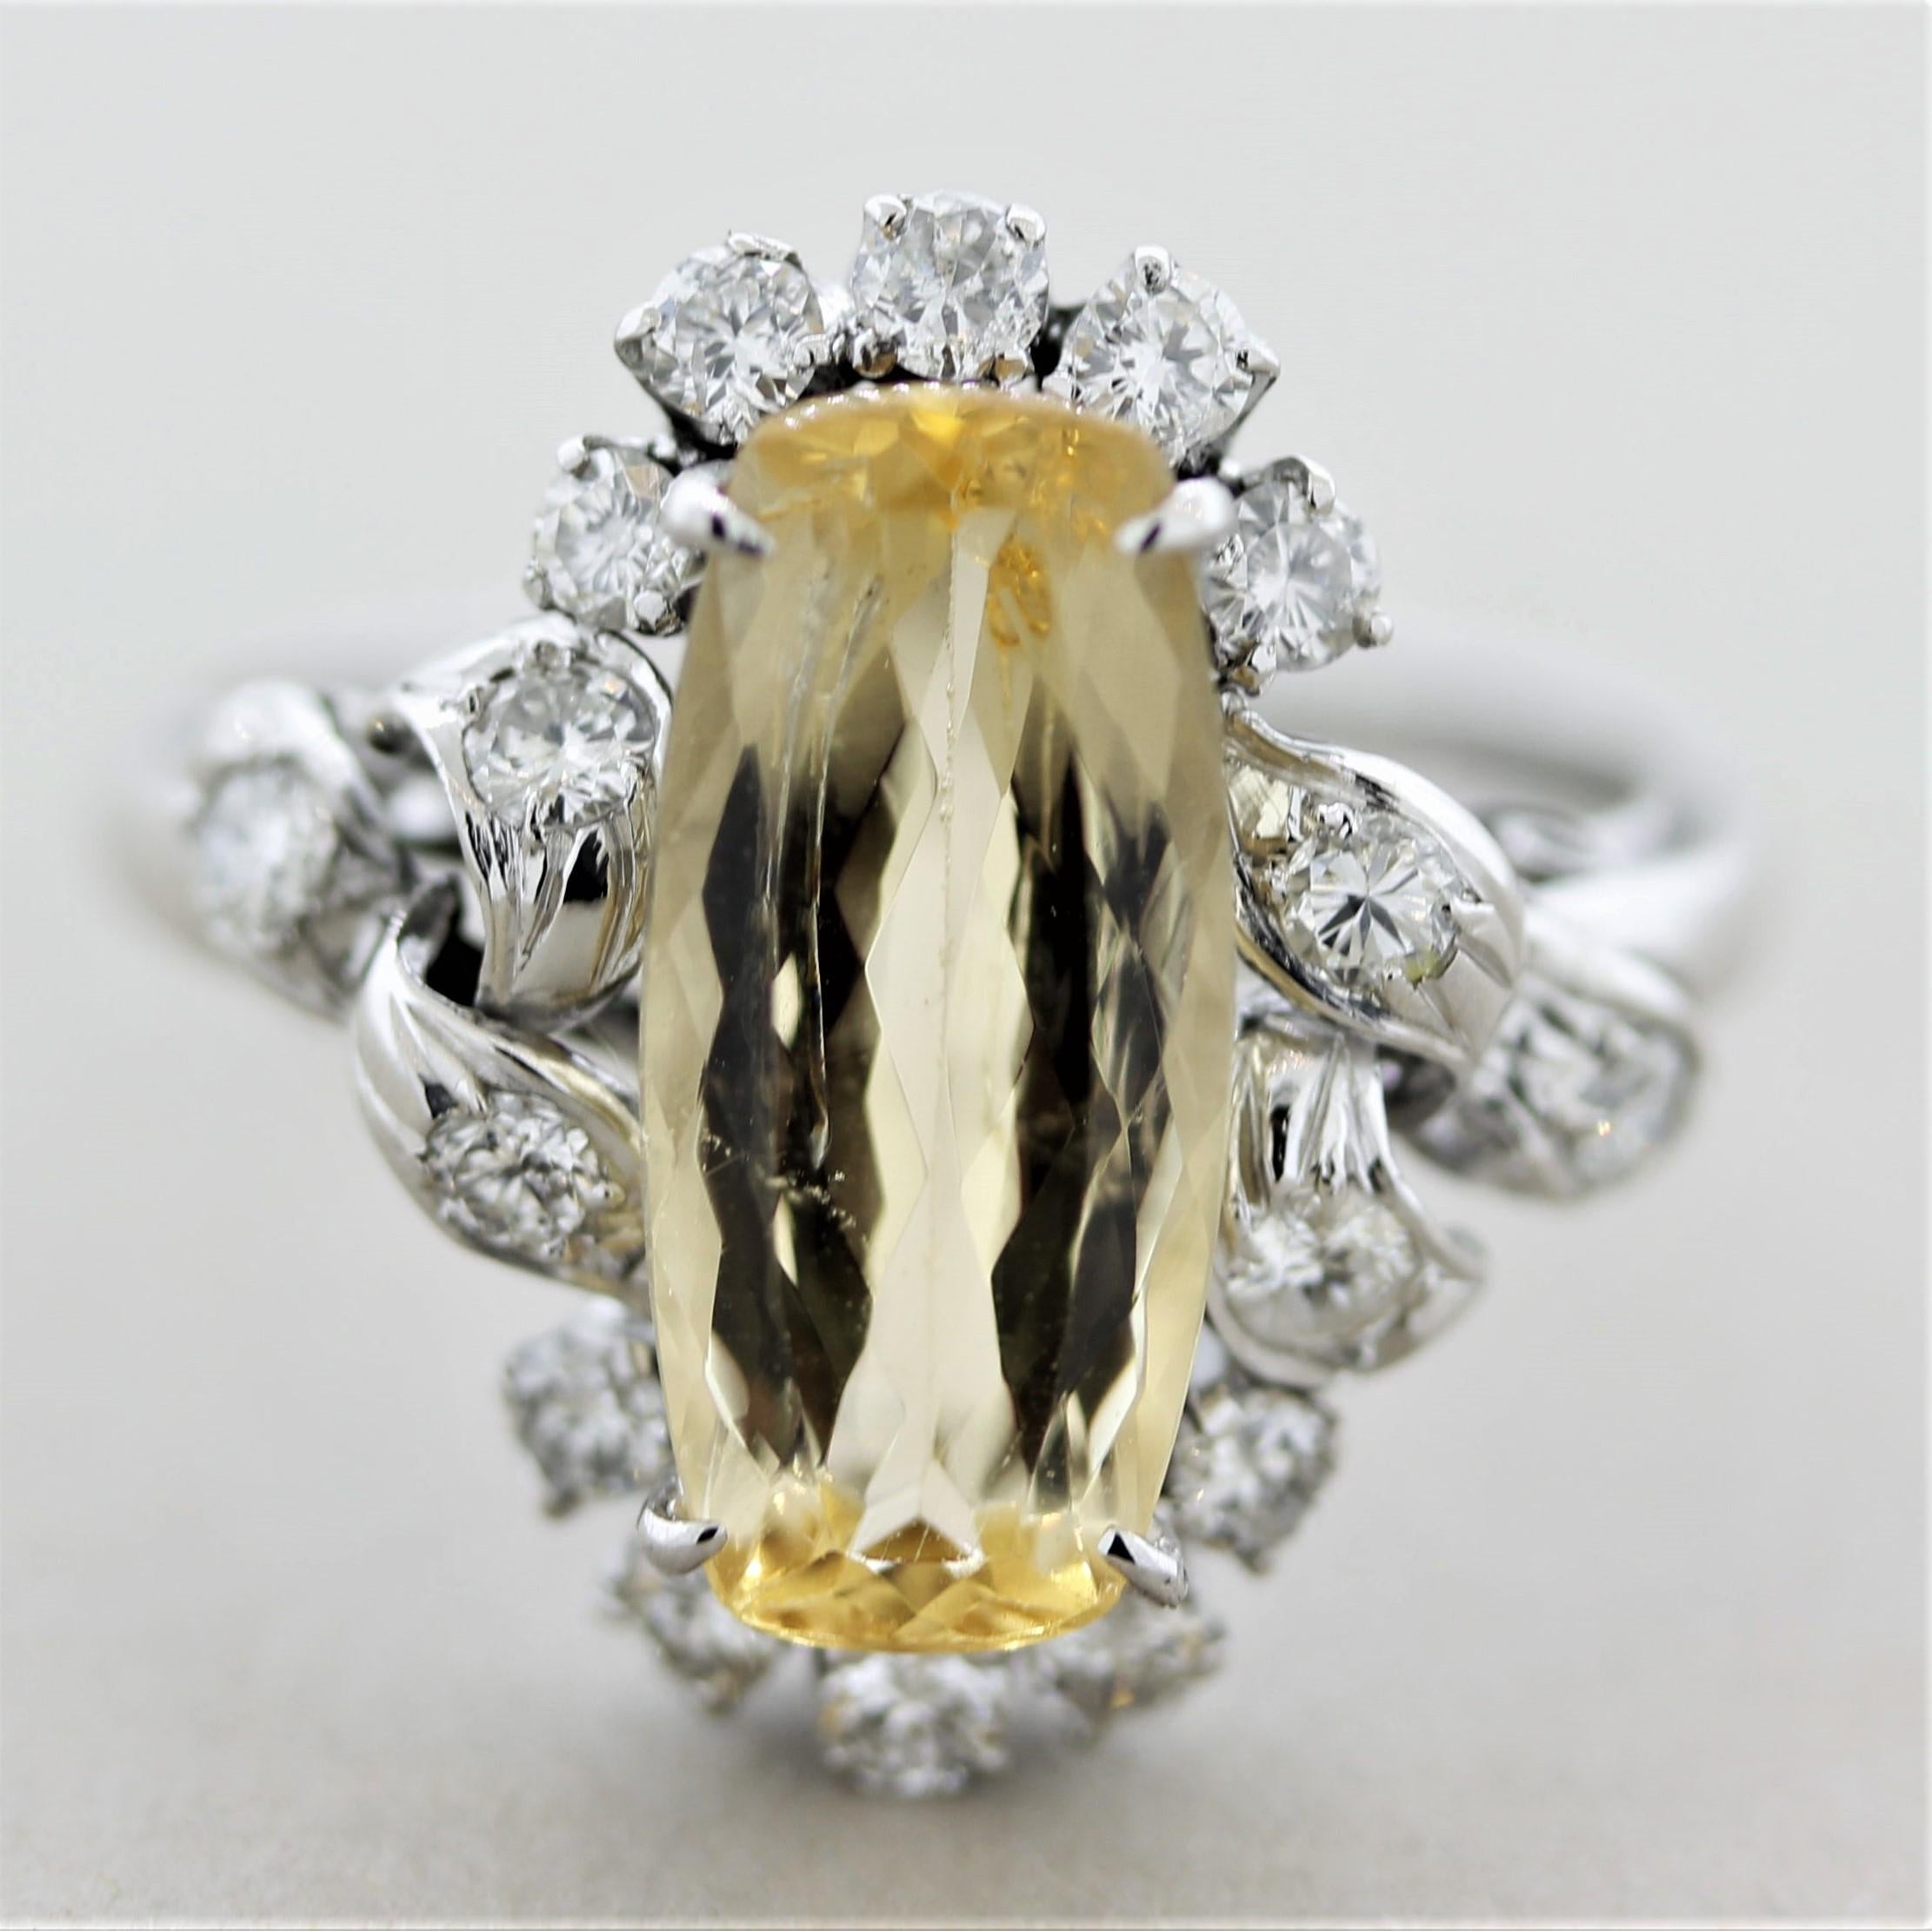 A mid-century treasure, circa 1940's, featuring a 3.38 carat elongated cushion-shaped topaz. It has a bright golden color and is accented by 0.22 carats of diamonds. Hand-fabricated in platinum and ready to be worn. 
Ring Size 6.5